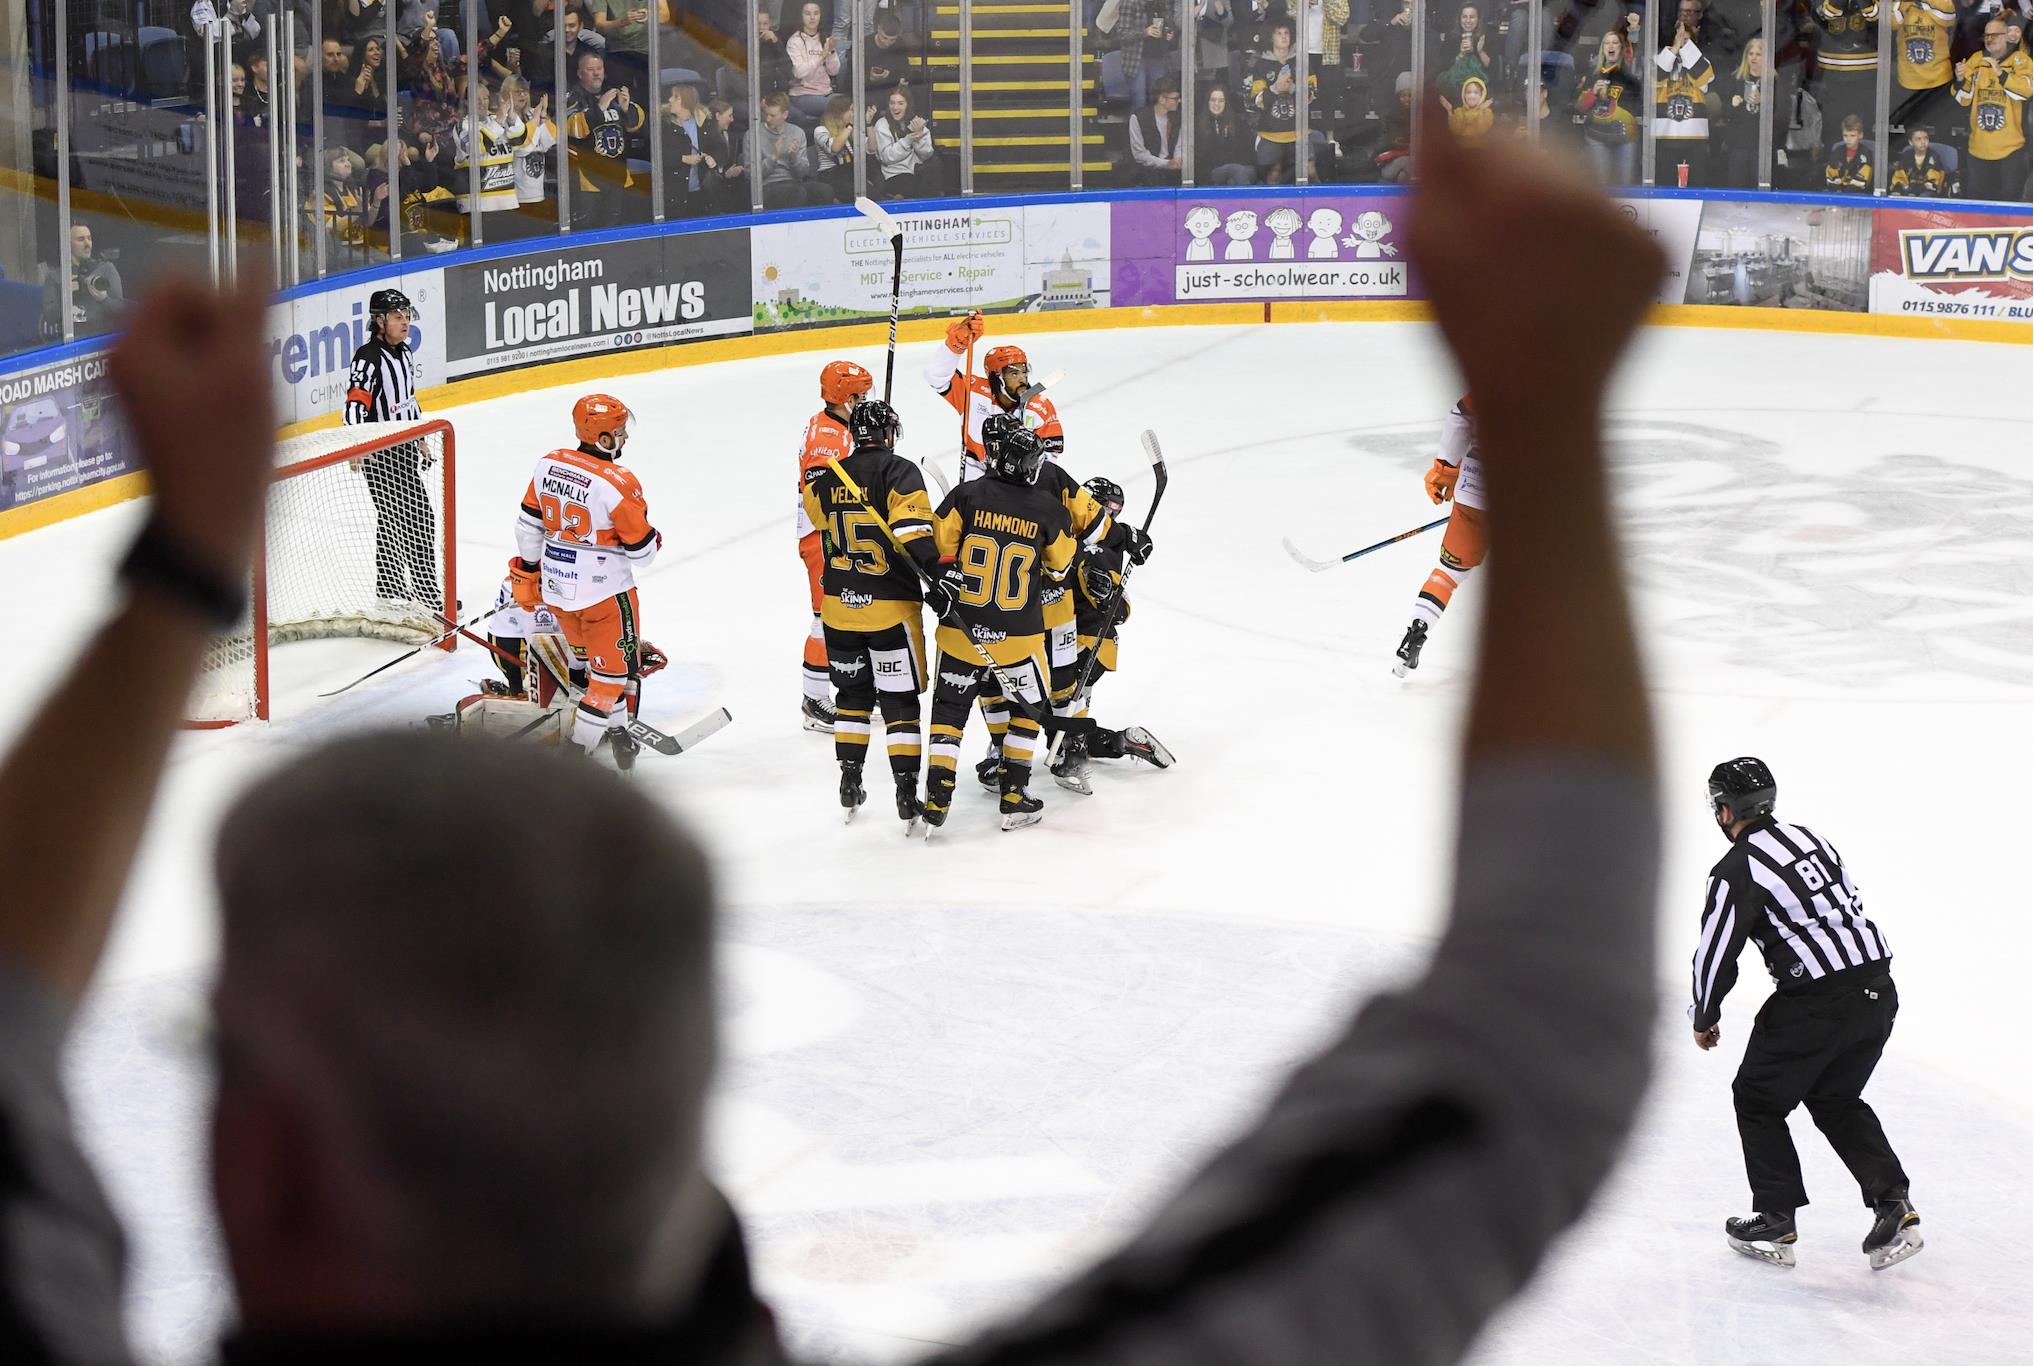 PANTHERS FACE STEELERS AT SOLD-OUT MOTORPOINT ARENA Top Image